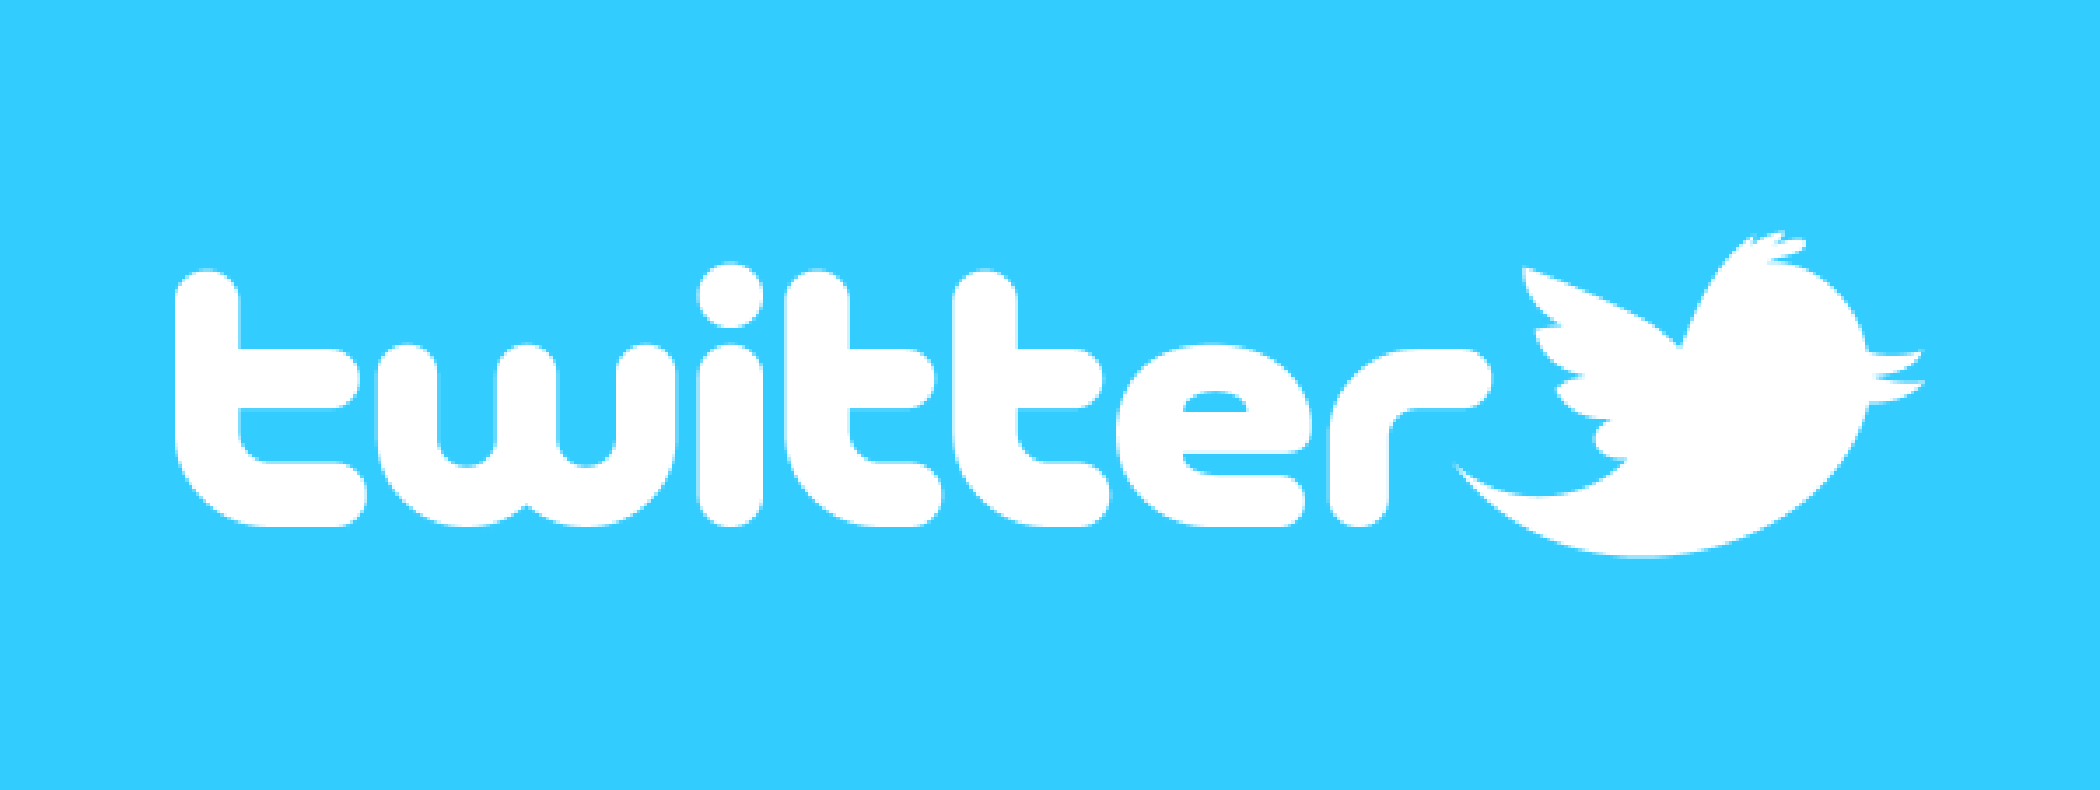 Twitter testing letting users remove followers and without blocking 